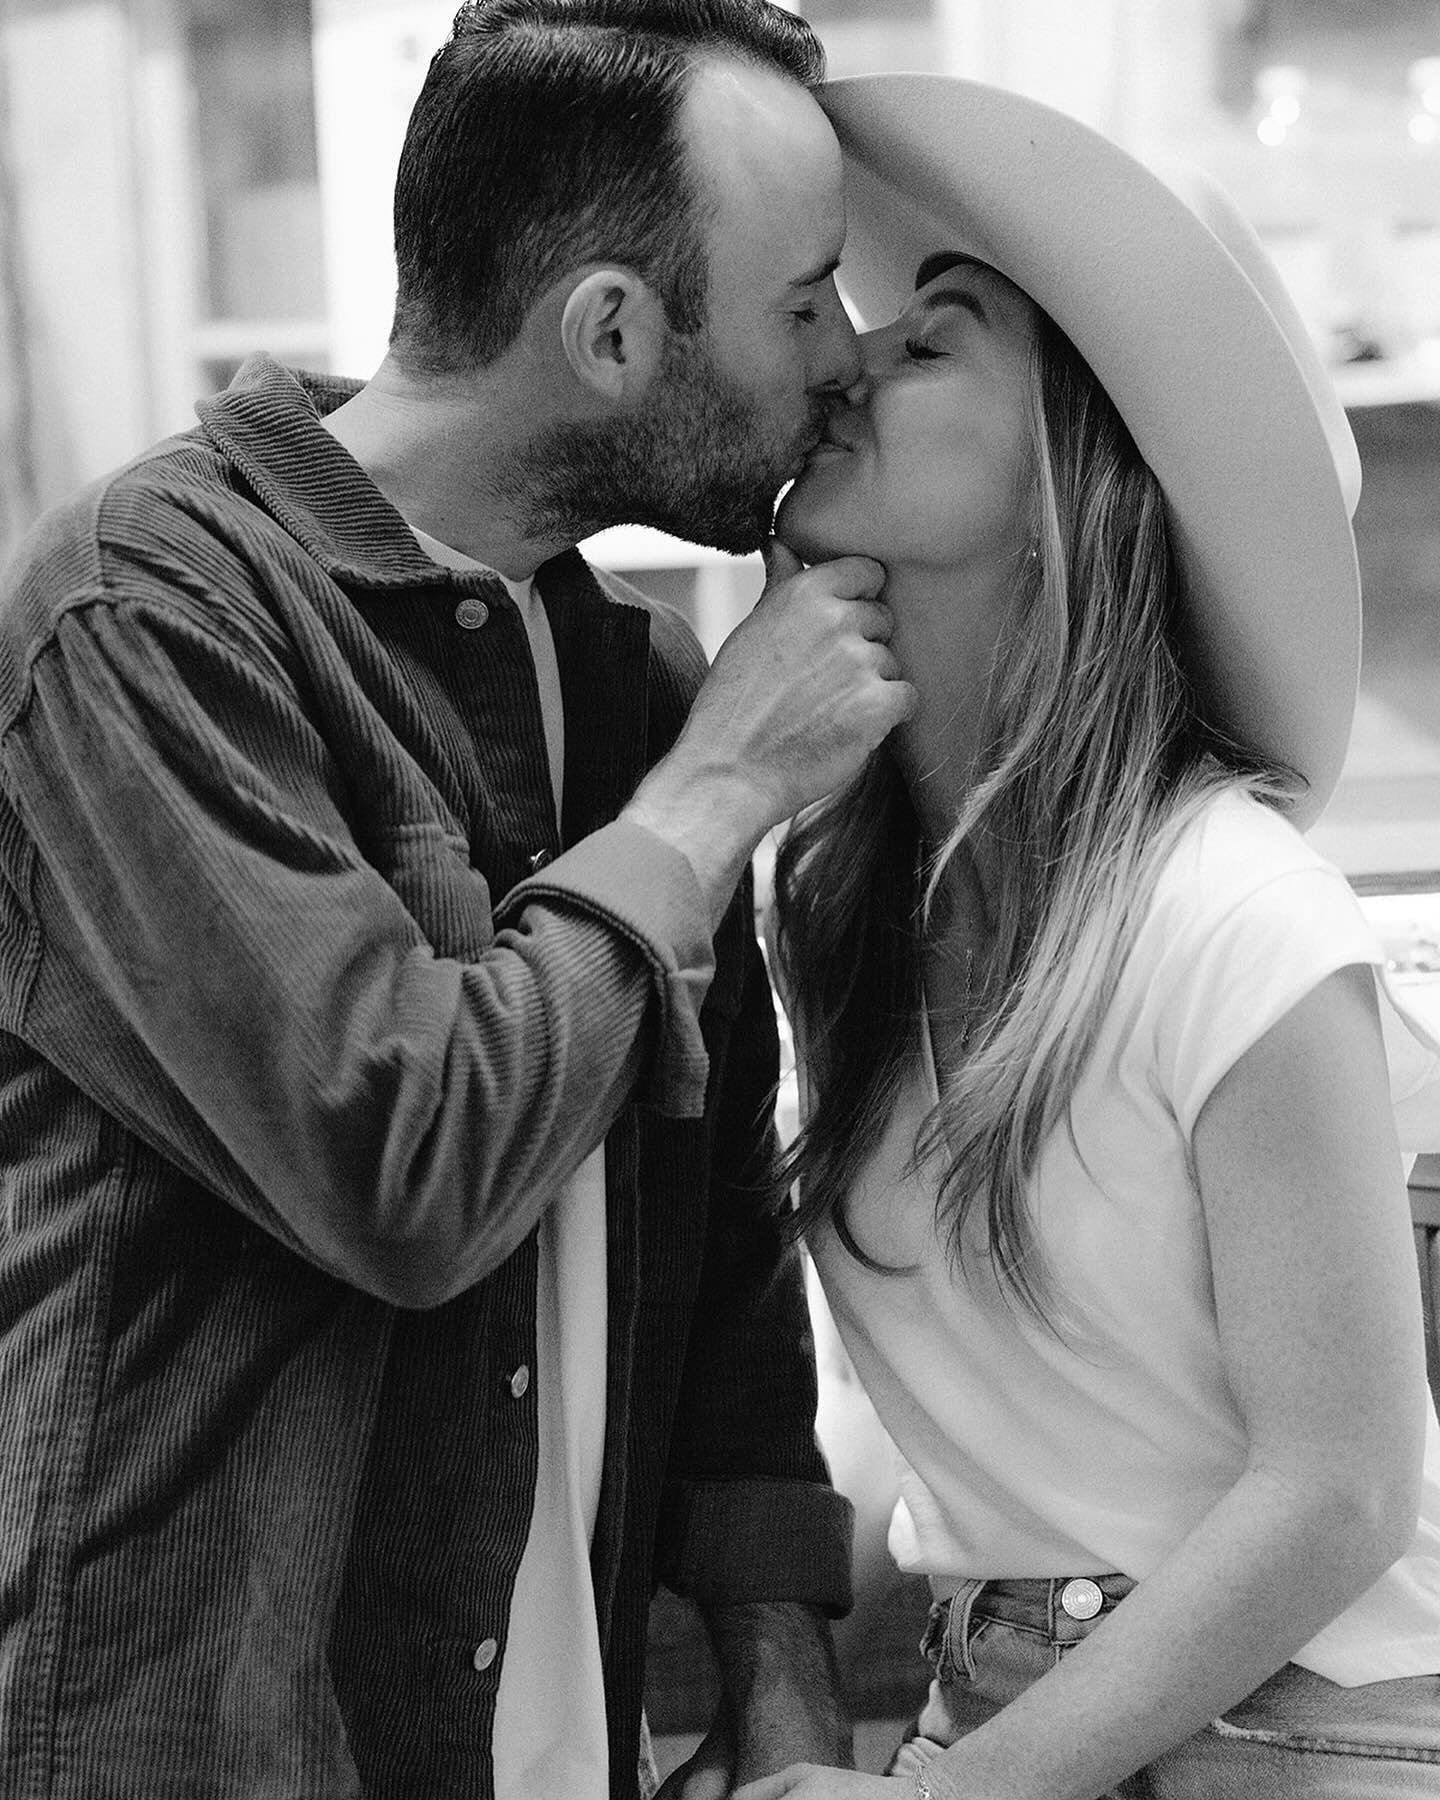 Love a country core moment. I need a trip back home, ASAP 🐎🤠

&mdash;&mdash;&mdash; 

Ann is a wedding photographer based in Austin, Texas and New York City. She has photographed wedding celebrations over the past 7 years with a hybrid style of doc